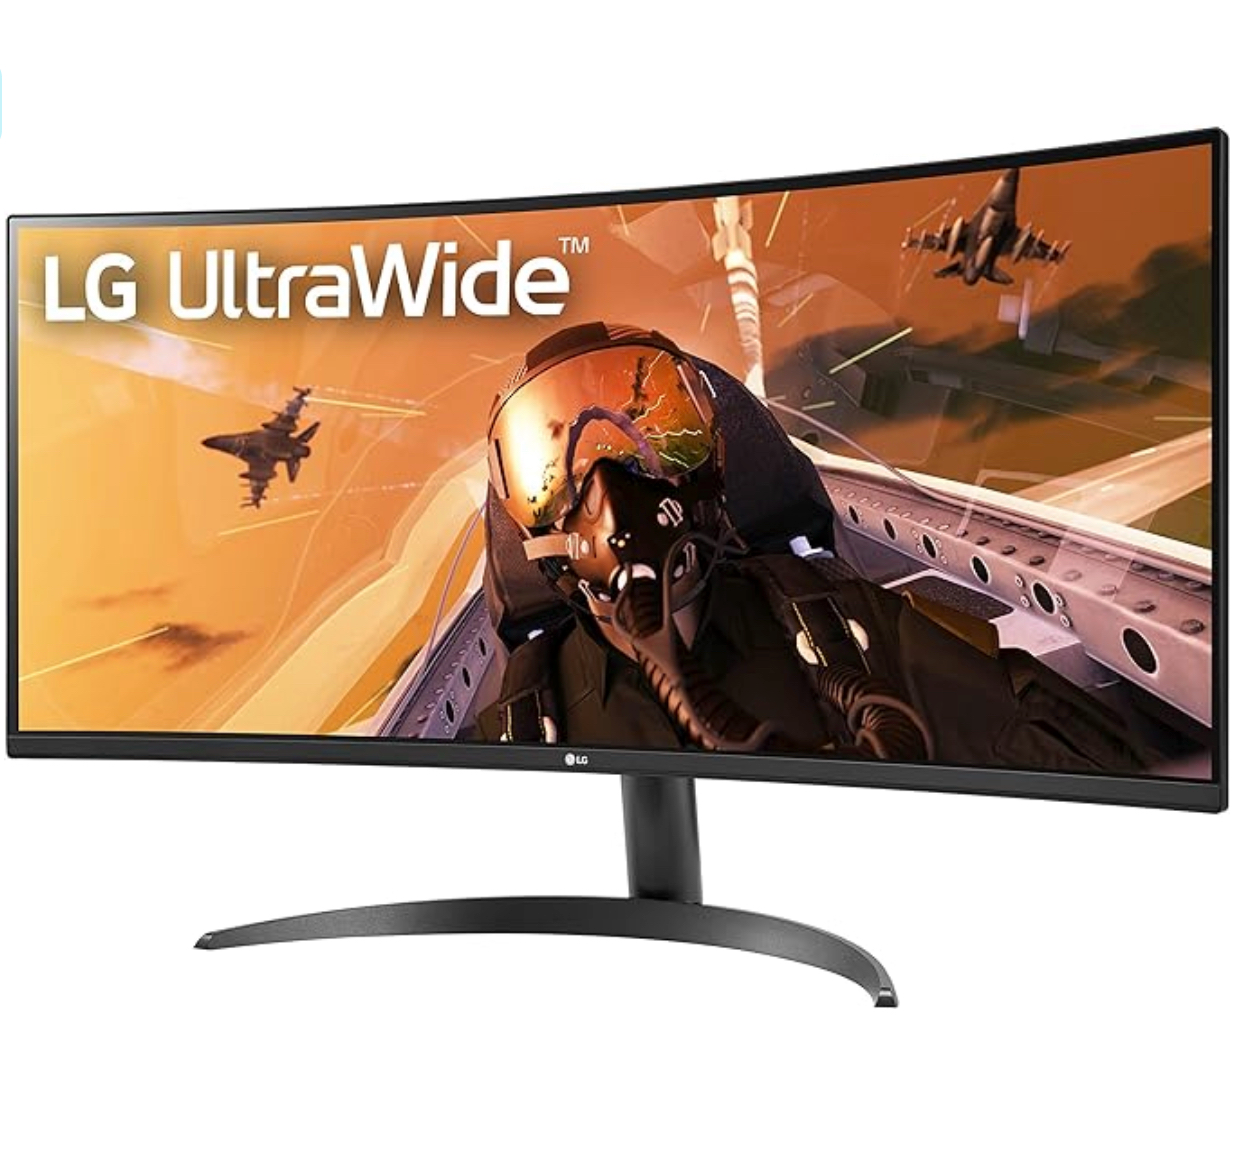 LG 34-inch ultrawide curved monitor. 